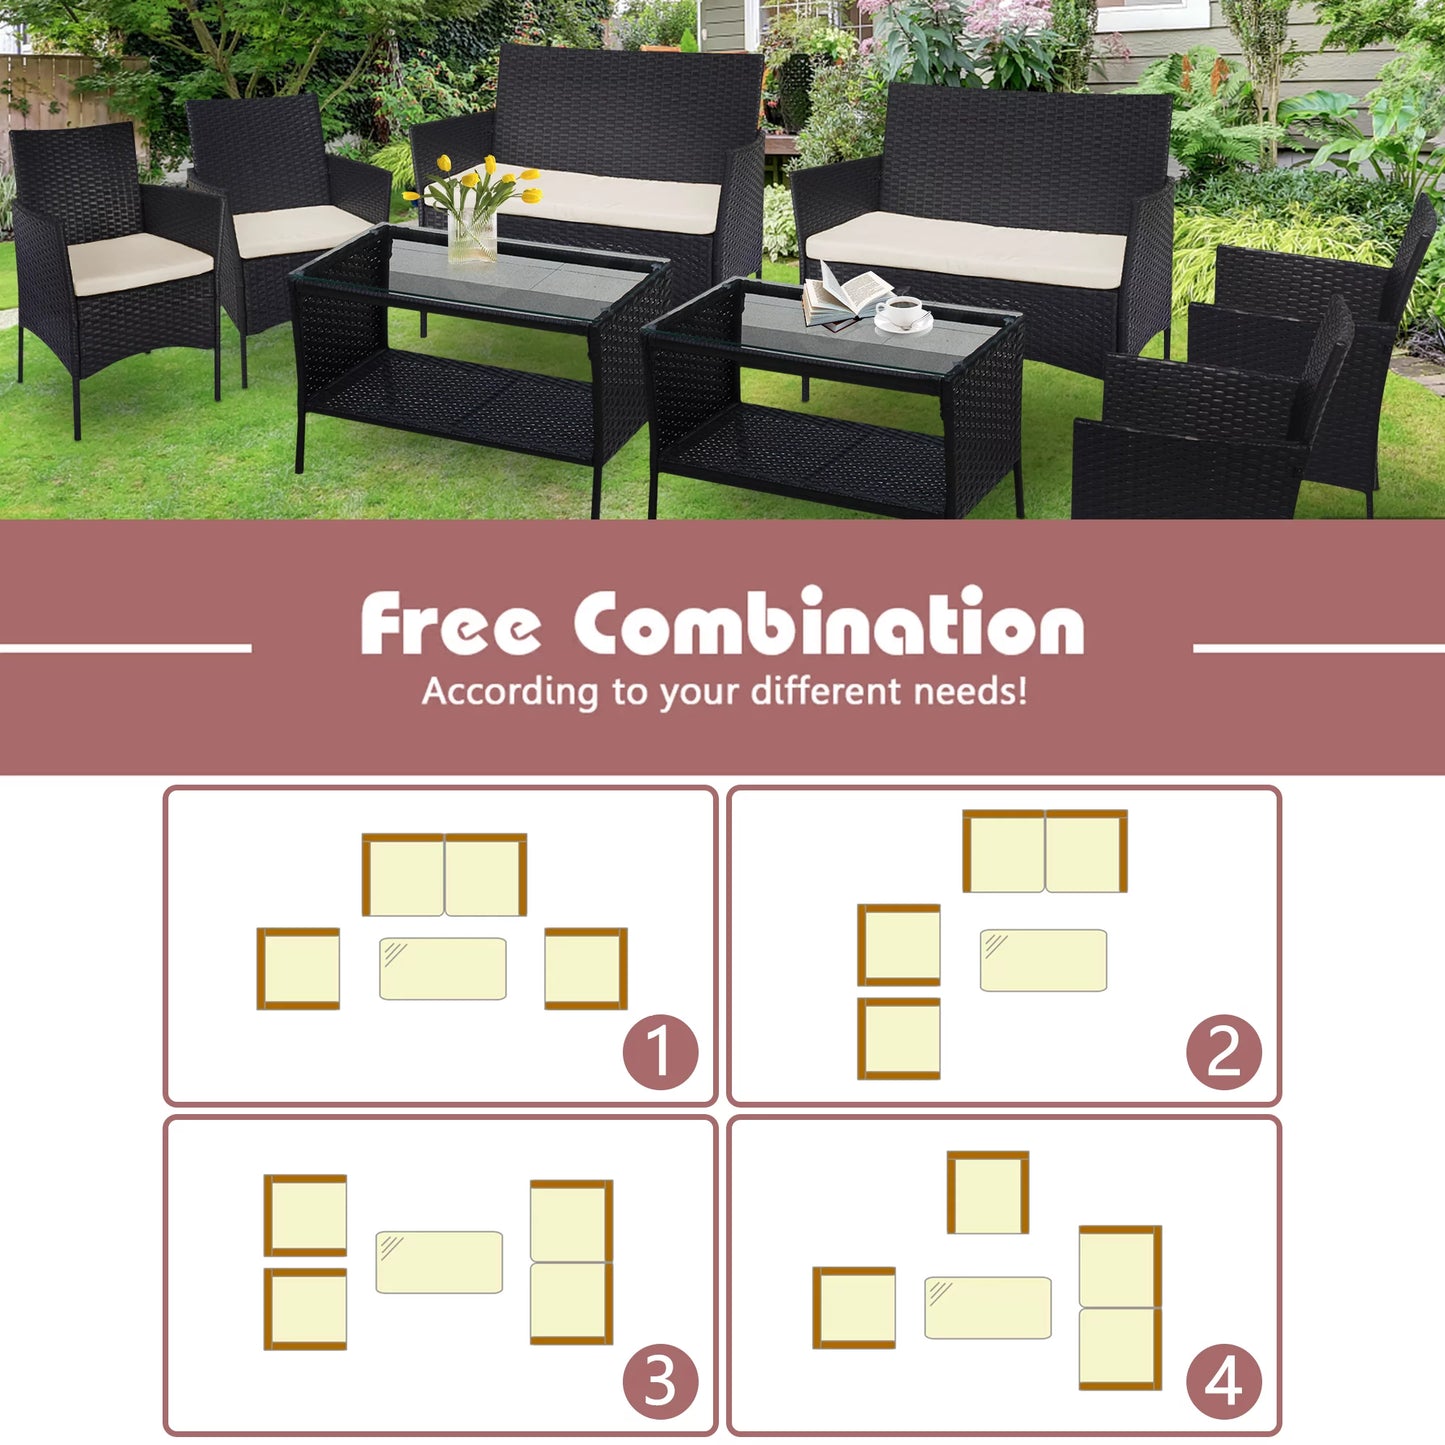 8 PCS Outdoor Patio Bistro Furniture Set, All-Weather Rattan Chair Set, Conversation Furniture Sets, Cushioned Seat & Glass Table, Bistro Table Set for Porch Garden Poolside Balcony